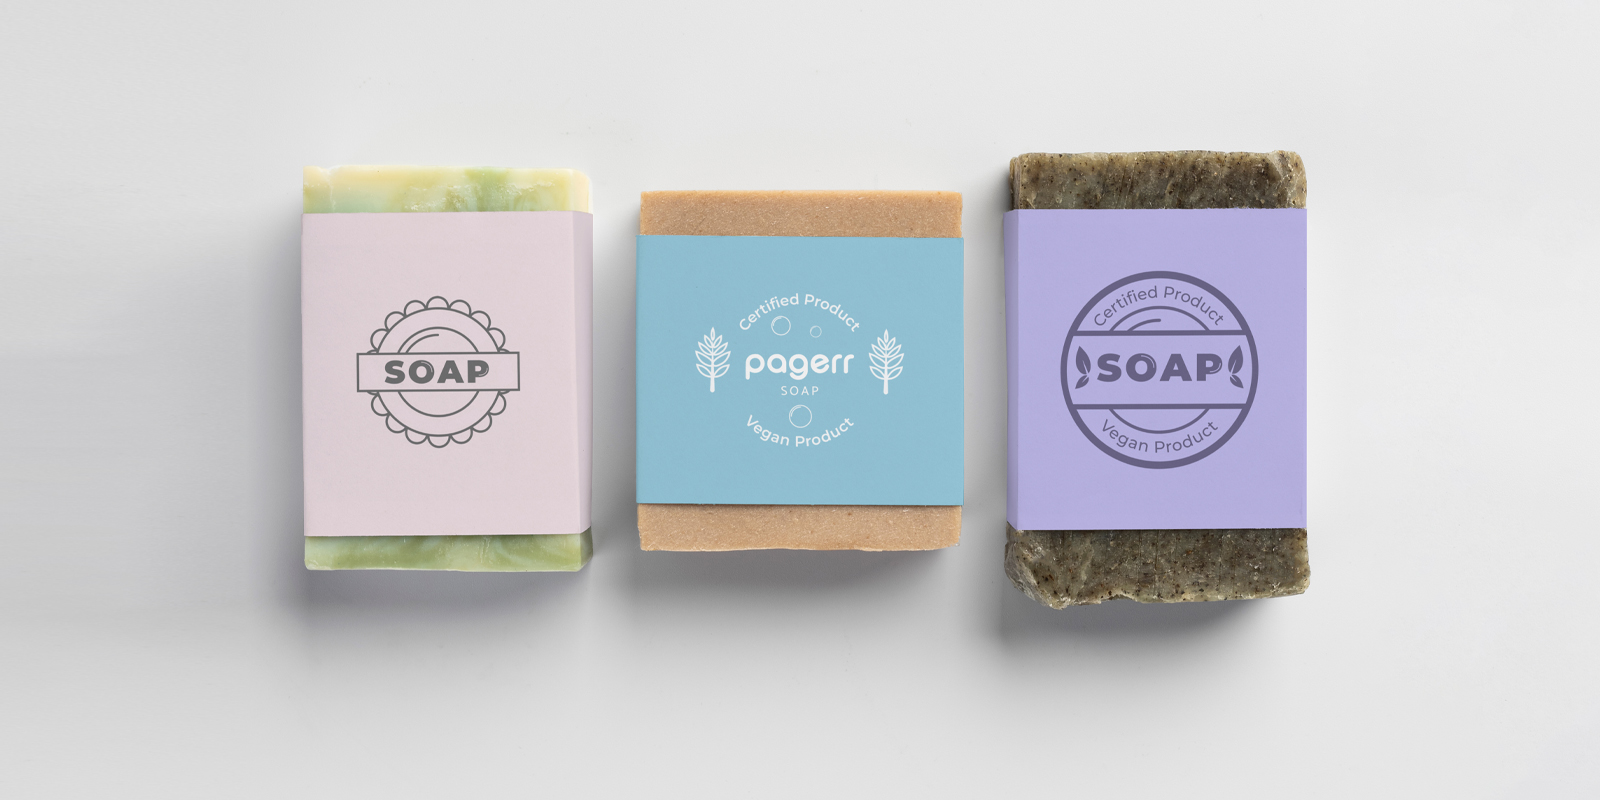 Soap labels in Newcastle - Print with Pagerr